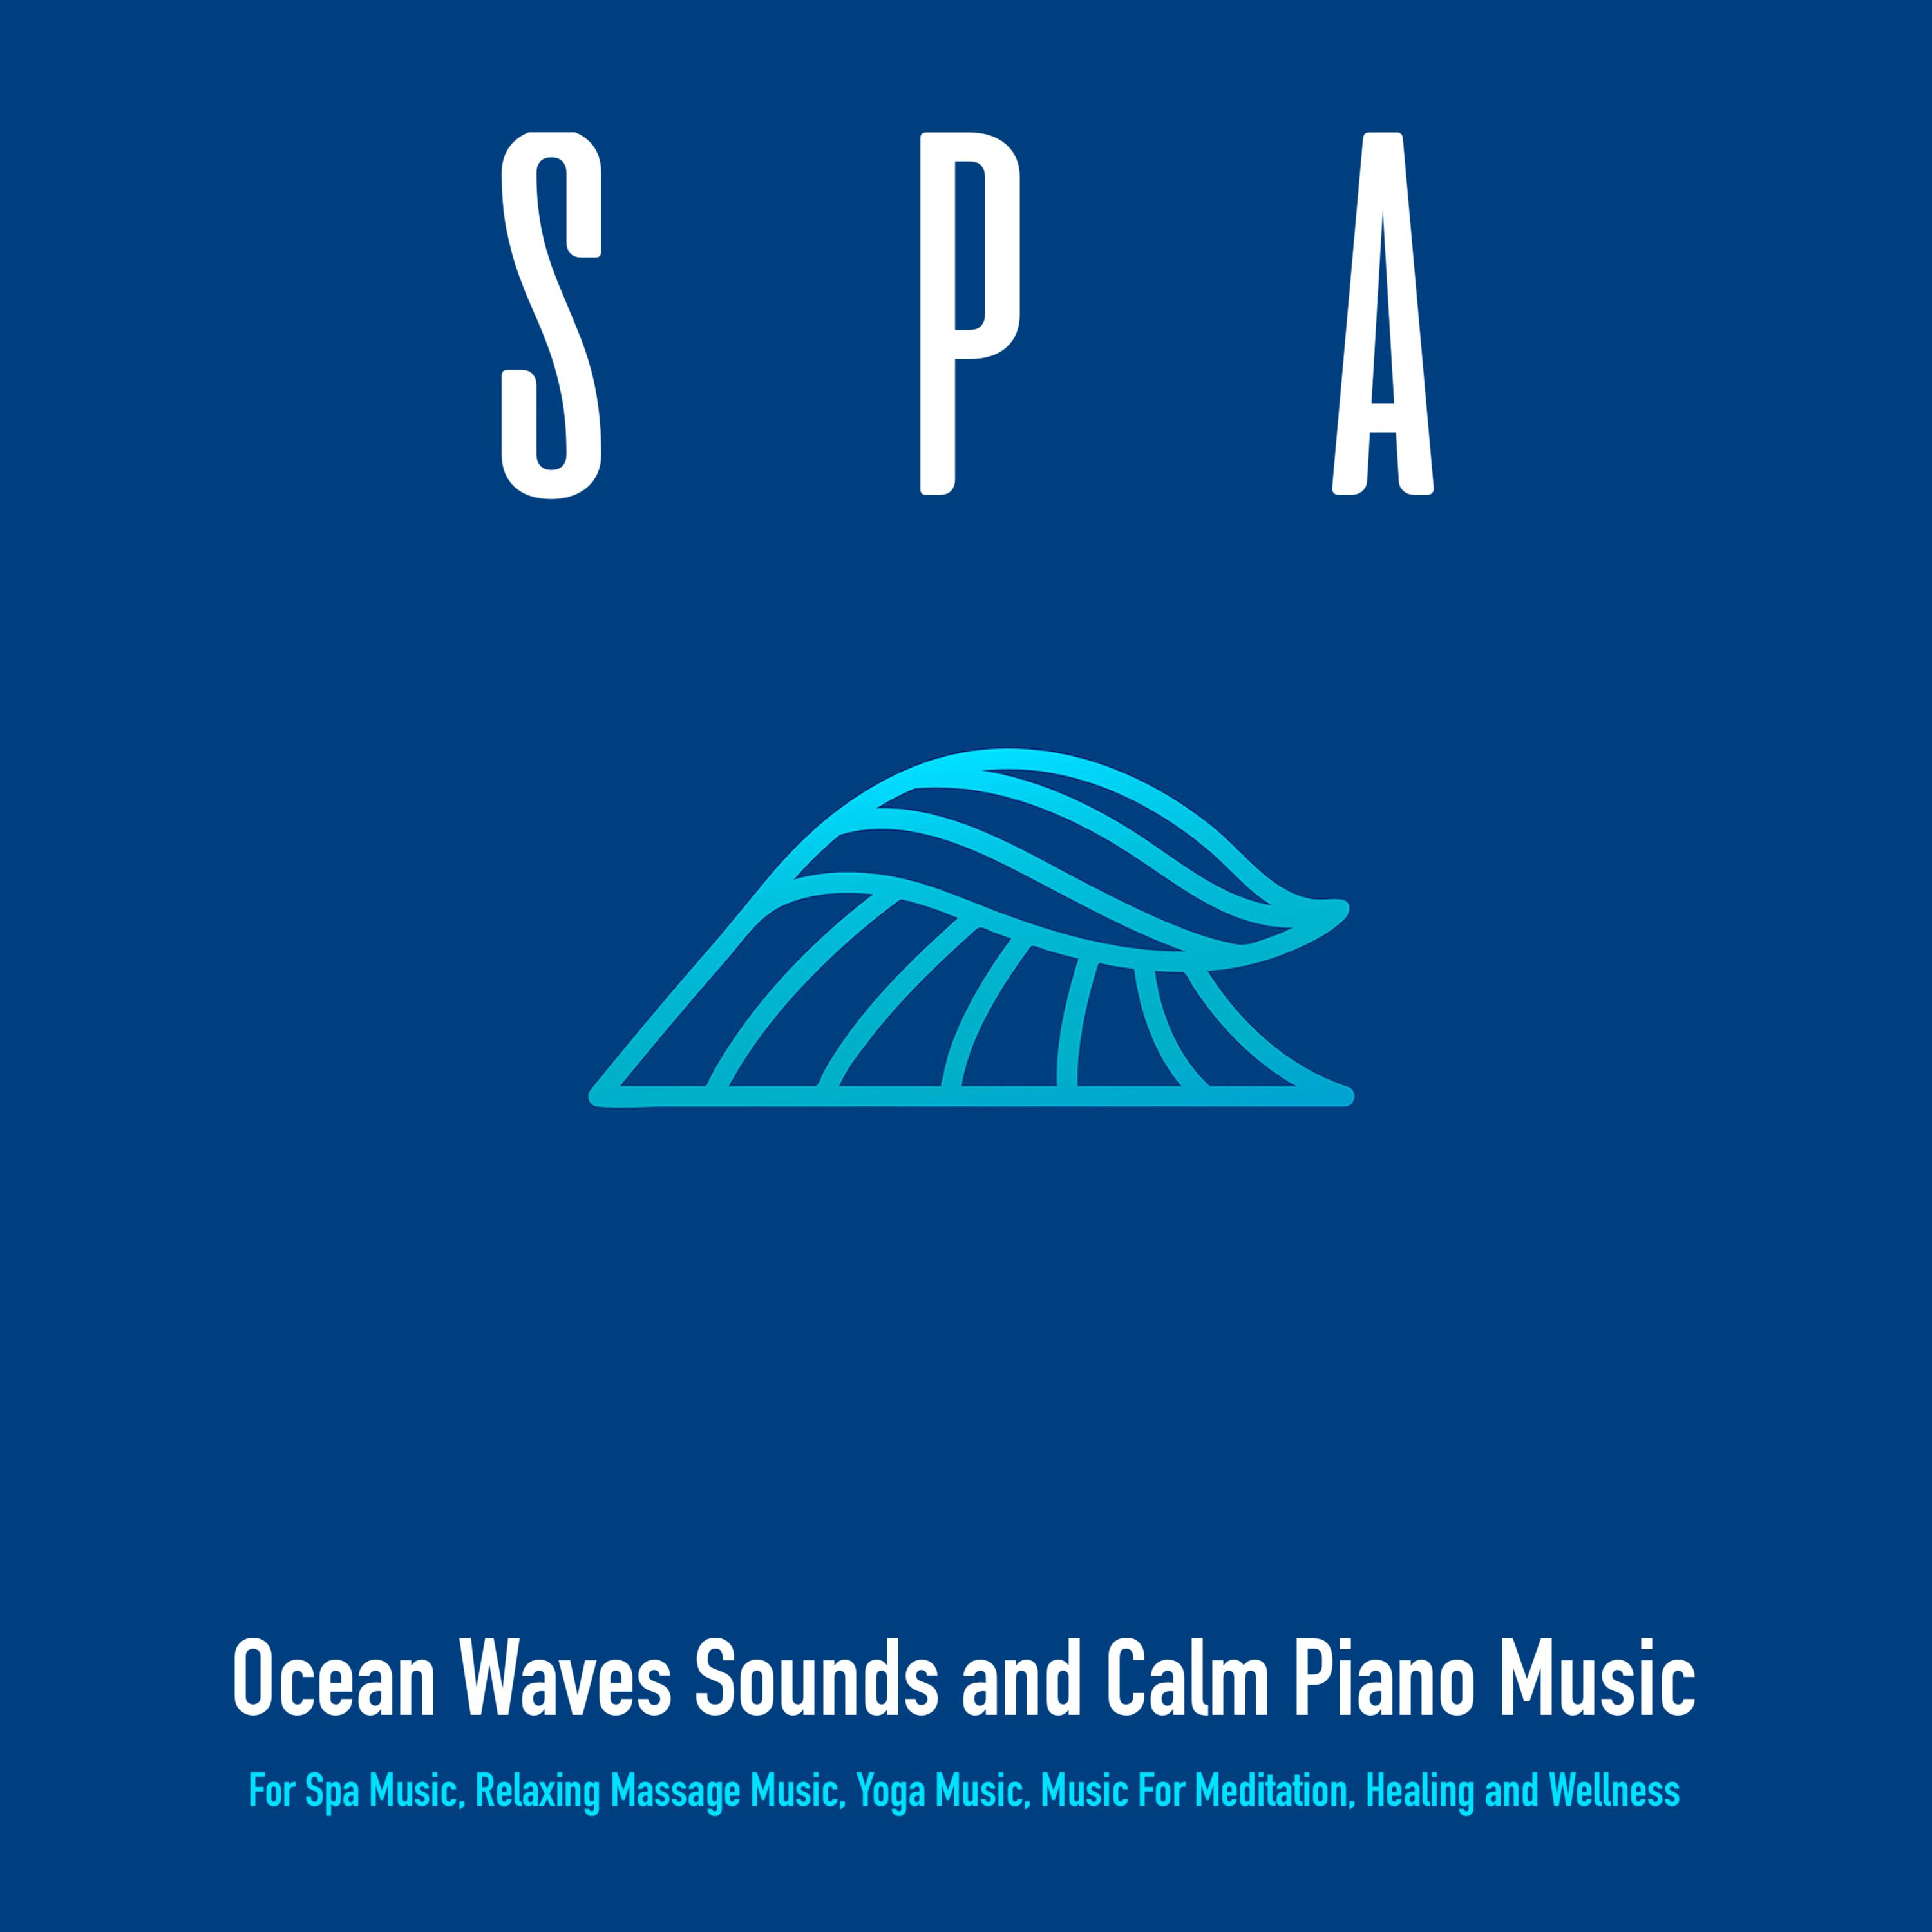 Spa: Ocean Waves Sounds and Calm Piano Music For Spa Music, Relaxing Massage Music, Yoga Music, Music For Meditation, Healing and Wellness